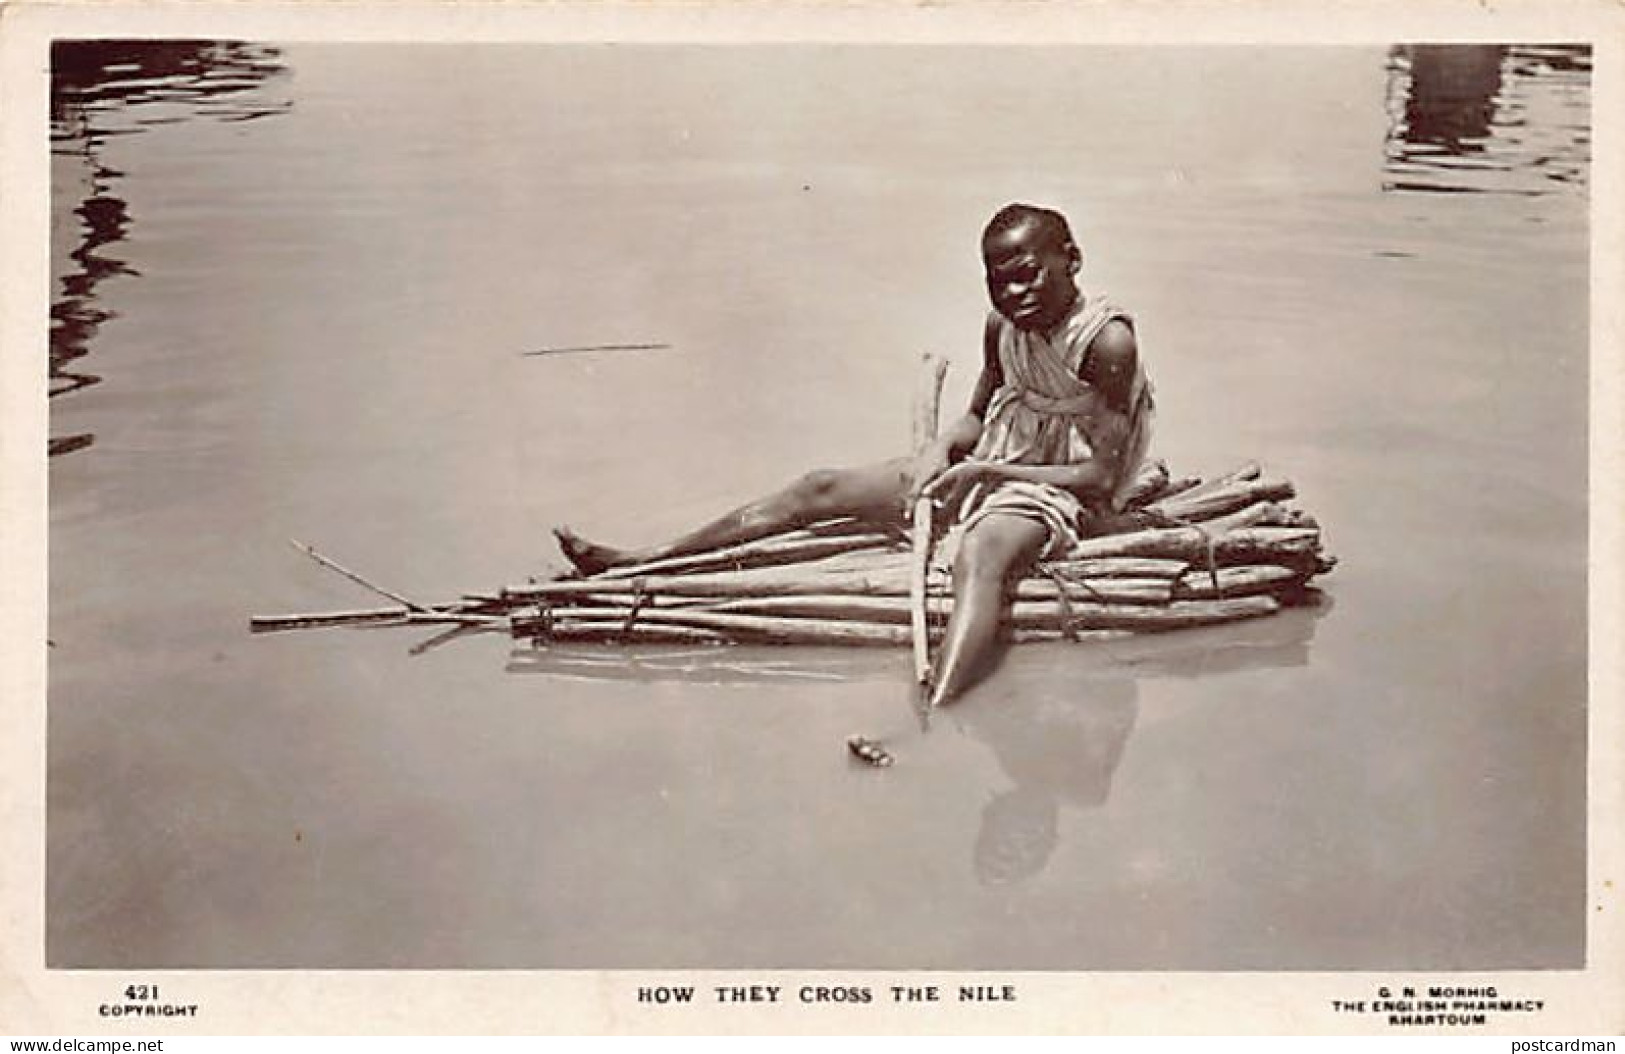 Sudan - How They Cross The Nile - Native Child - Publ. G. N. Morhig 421 - Sudan